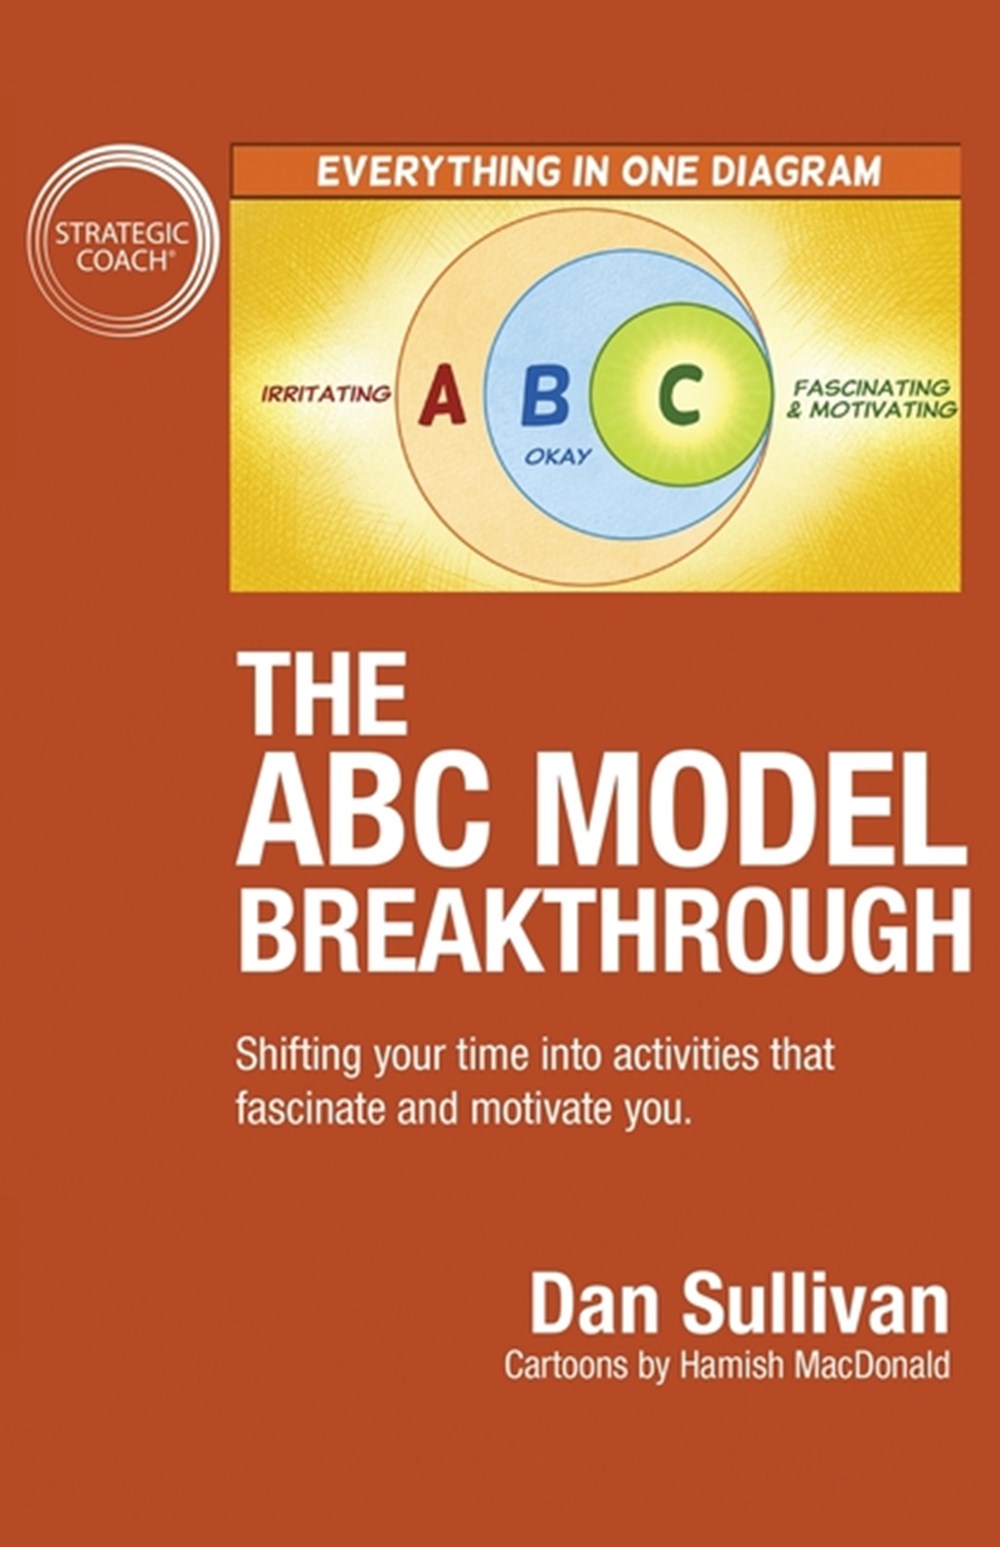 ABC Model Breakthrough: Shifting your time into activities that fascinate and motivate you.